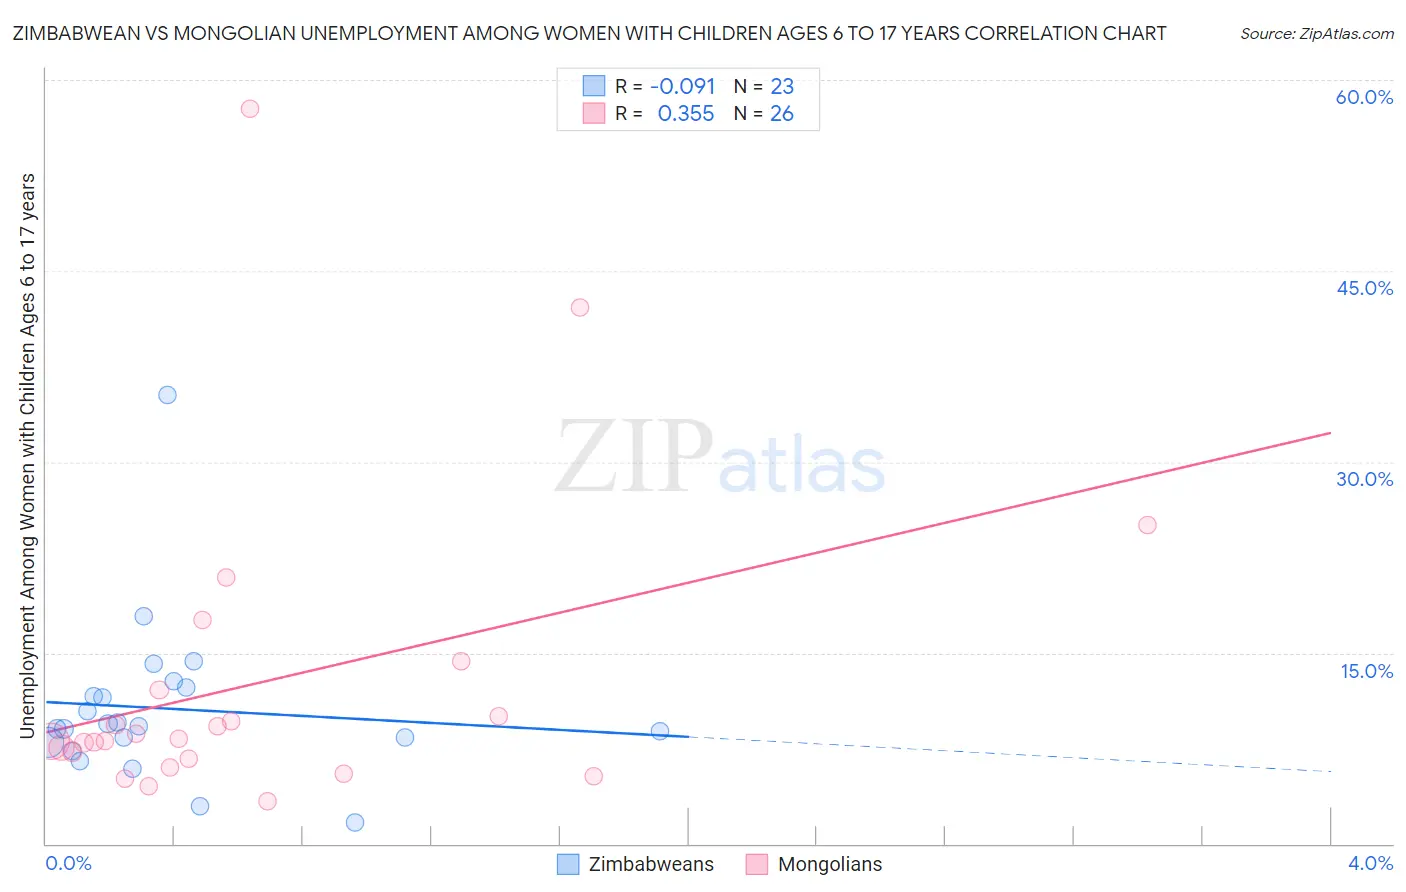 Zimbabwean vs Mongolian Unemployment Among Women with Children Ages 6 to 17 years